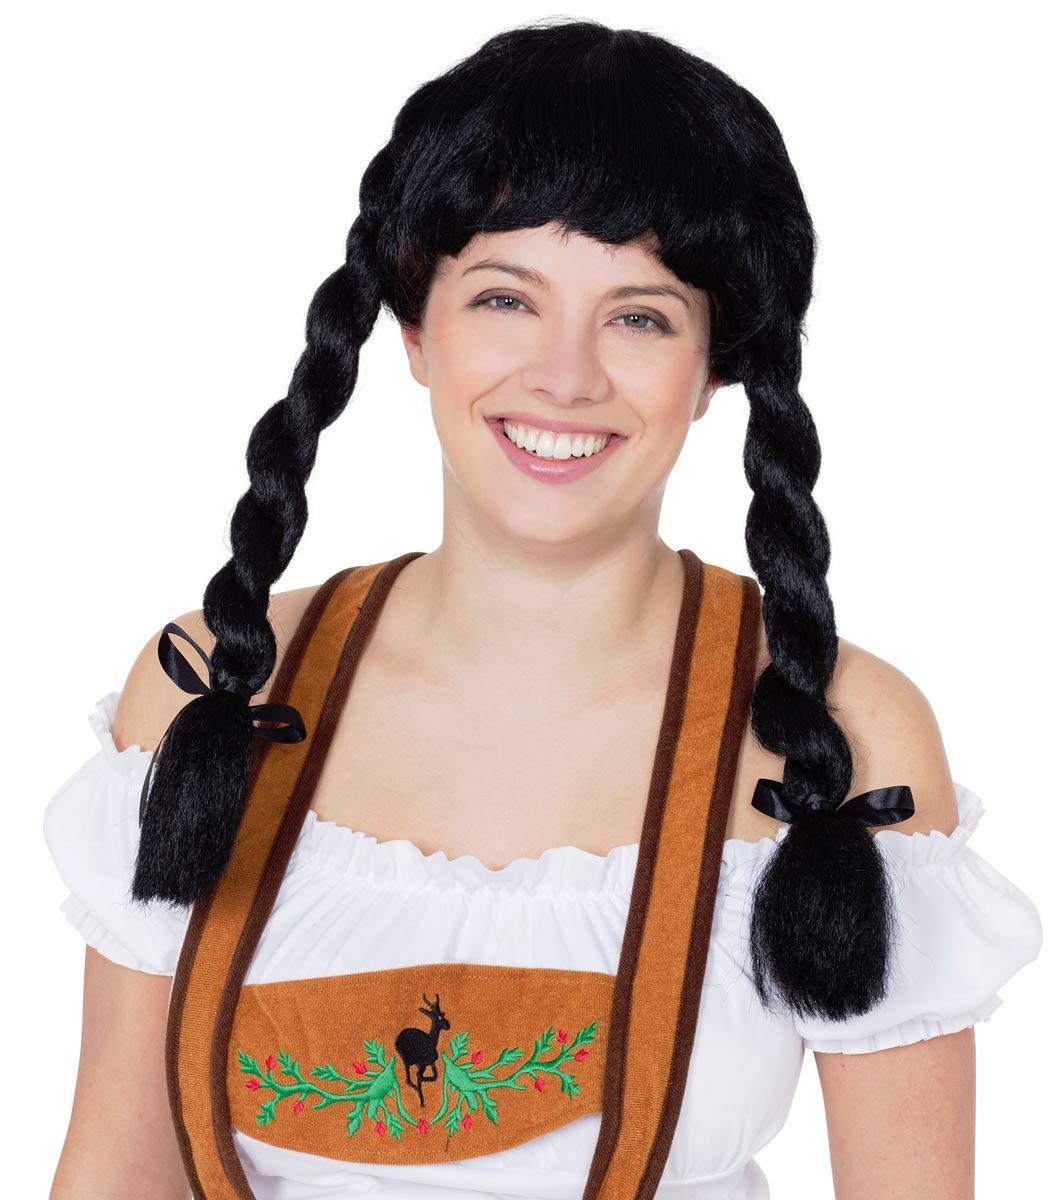 Bavarian Fraulein Pigtail Wig in Black by Bristol Novelties BW943 and available here at Karnival Costmes online party shop